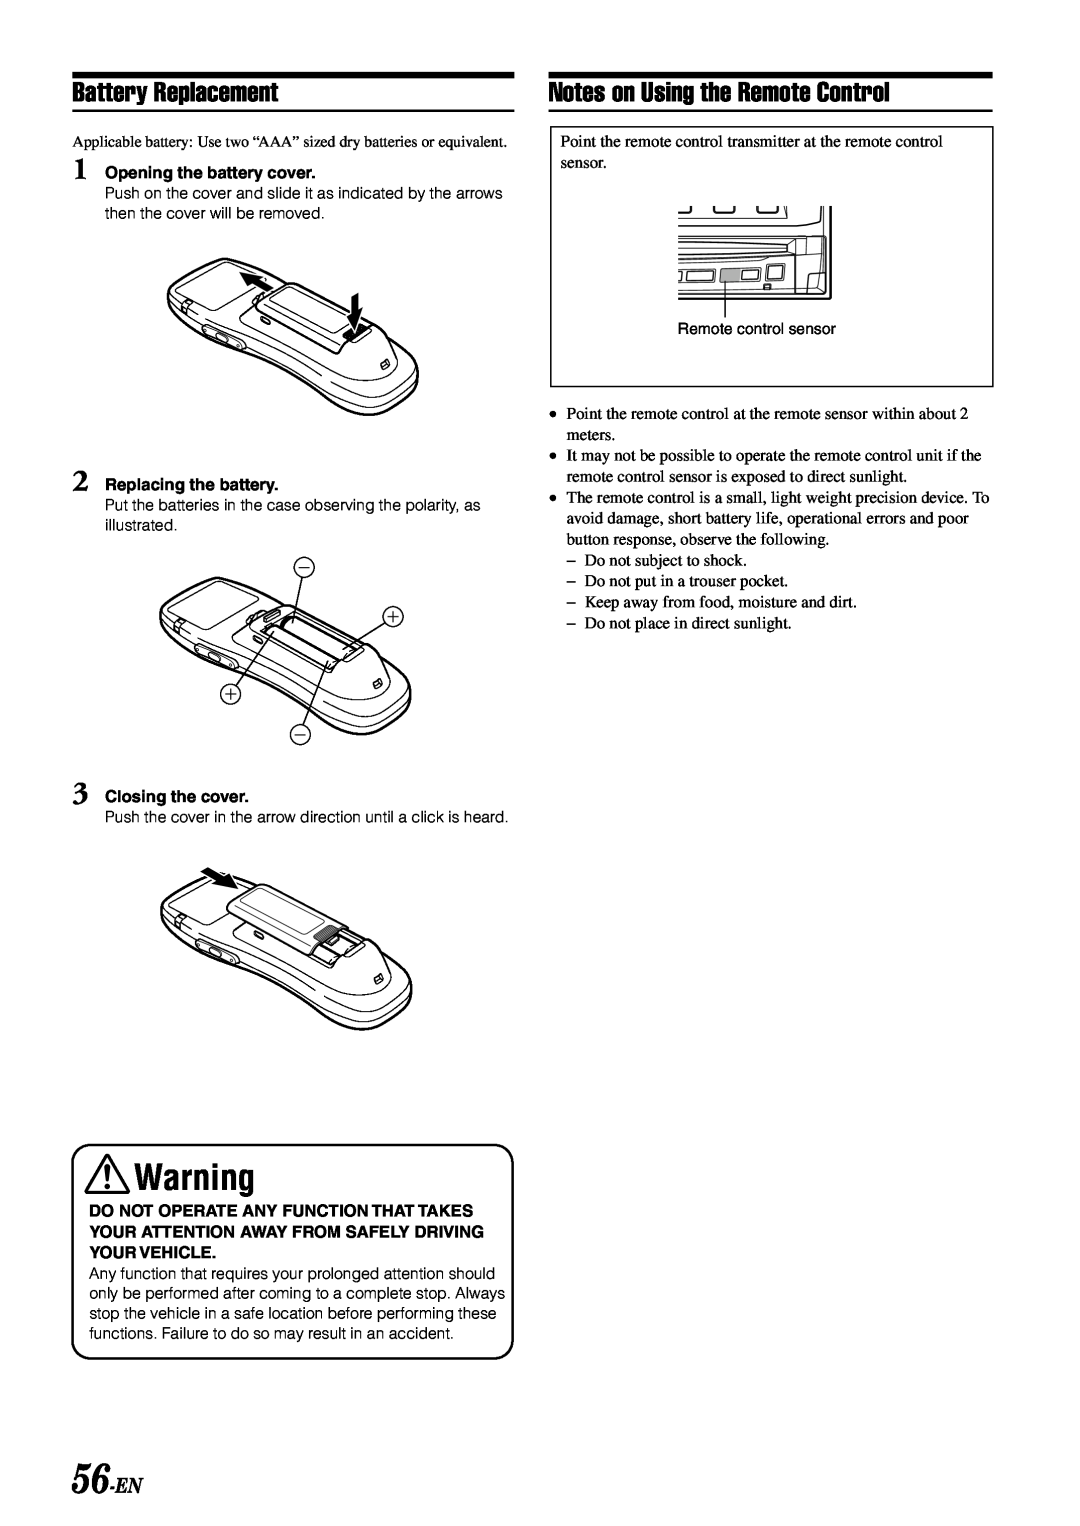 Alpine IVA-D900 owner manual Battery Replacement, Notes on Using the Remote Control, 56-EN 